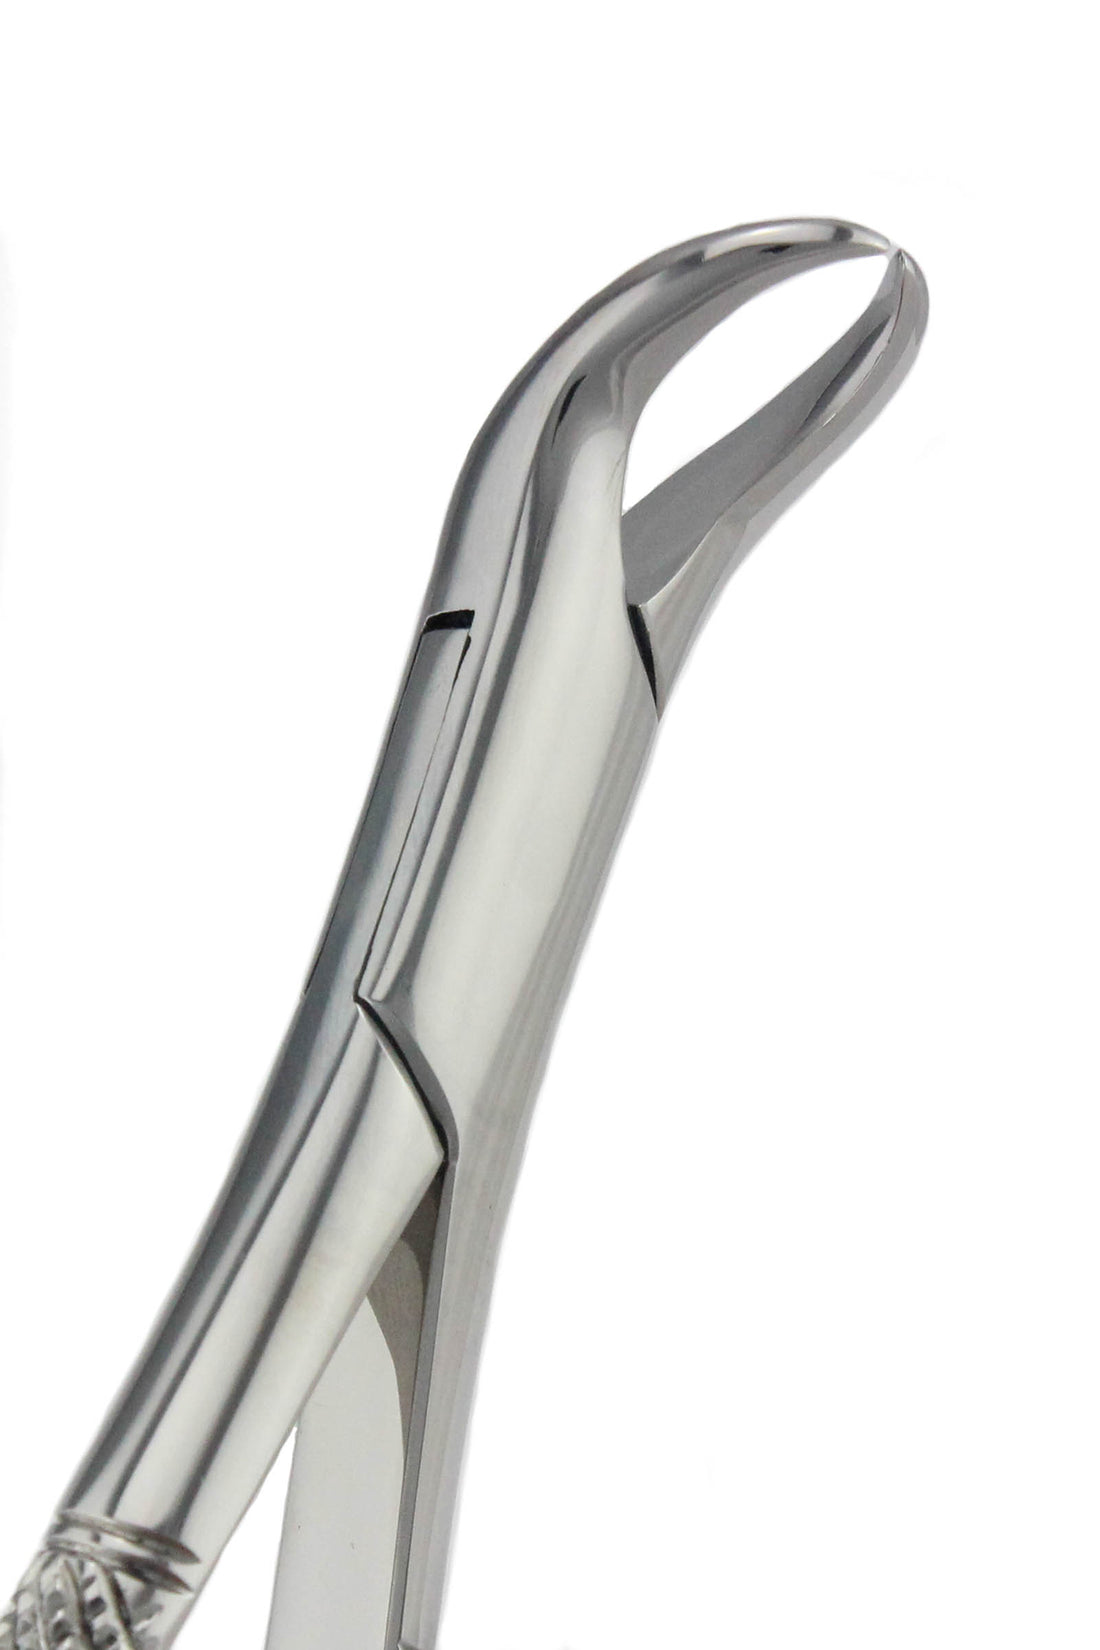 Extraction Forceps 023, Universal Cow Horn